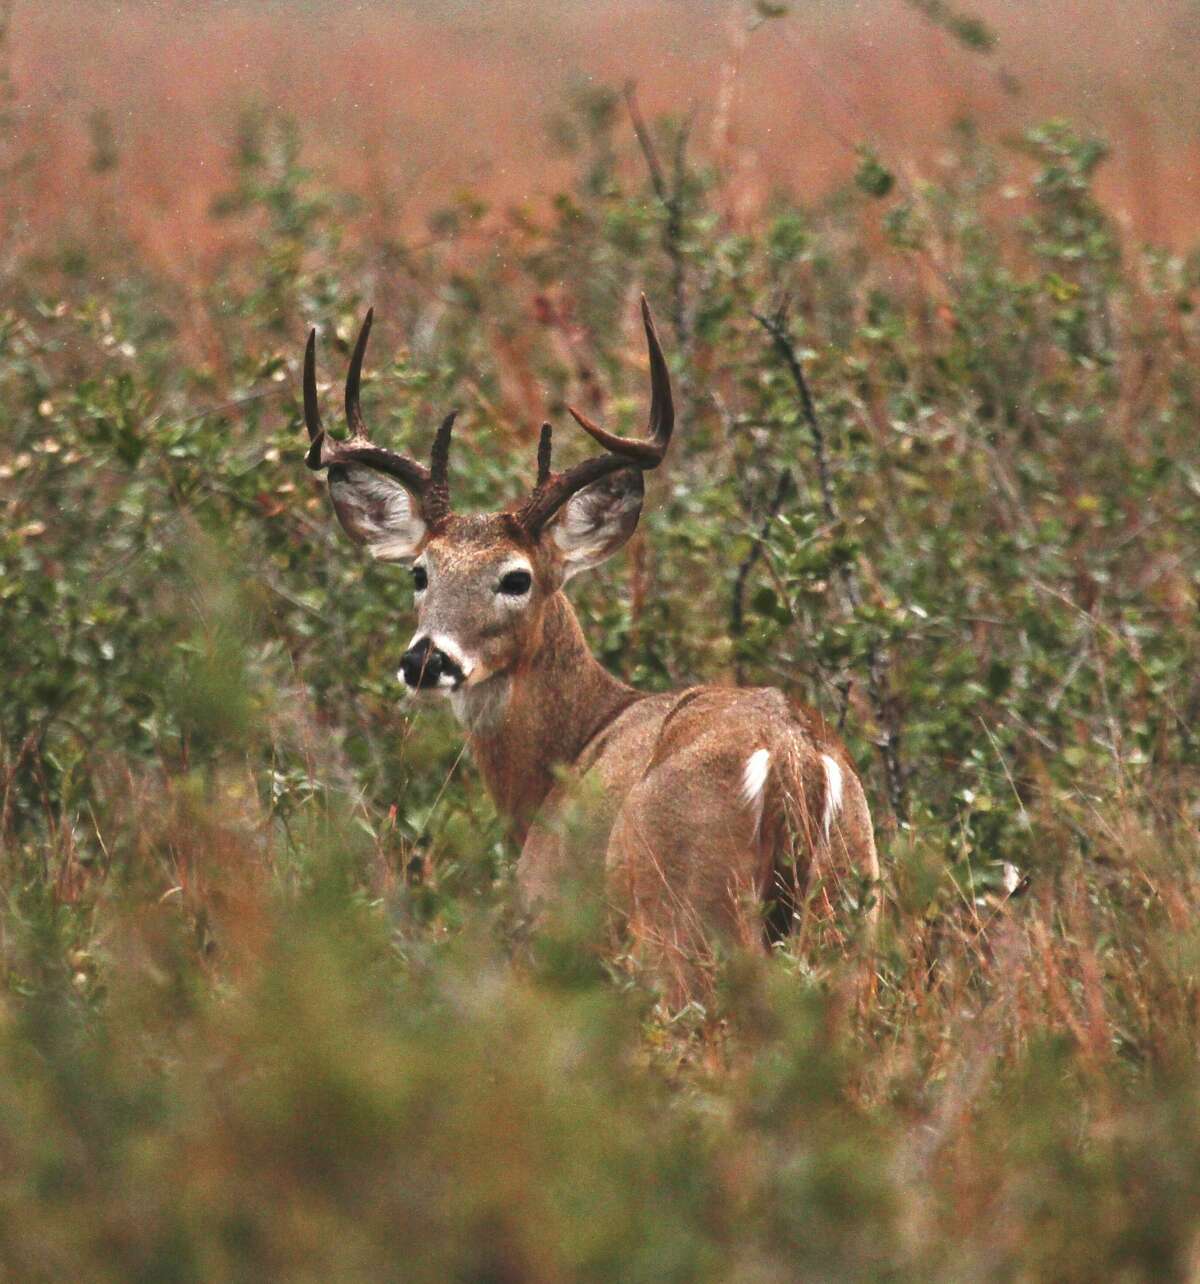 Hunters in Texas' North Deer Zone would see the general hunting season for white-tailed deer, the most popular game animal in the state, extended by two weeks under a proposal that would standardize the season's opening and closing dates to mirror those currently used in South Texas.